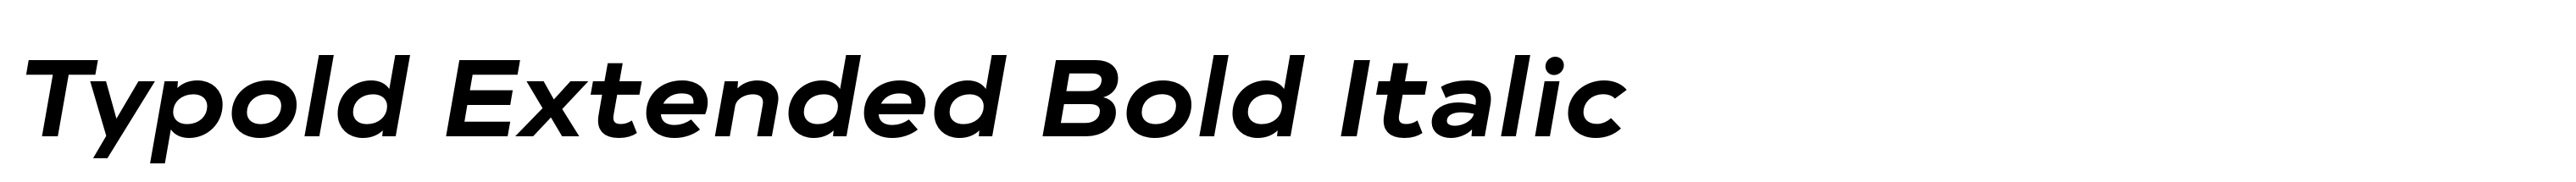 Typold Extended Bold Italic